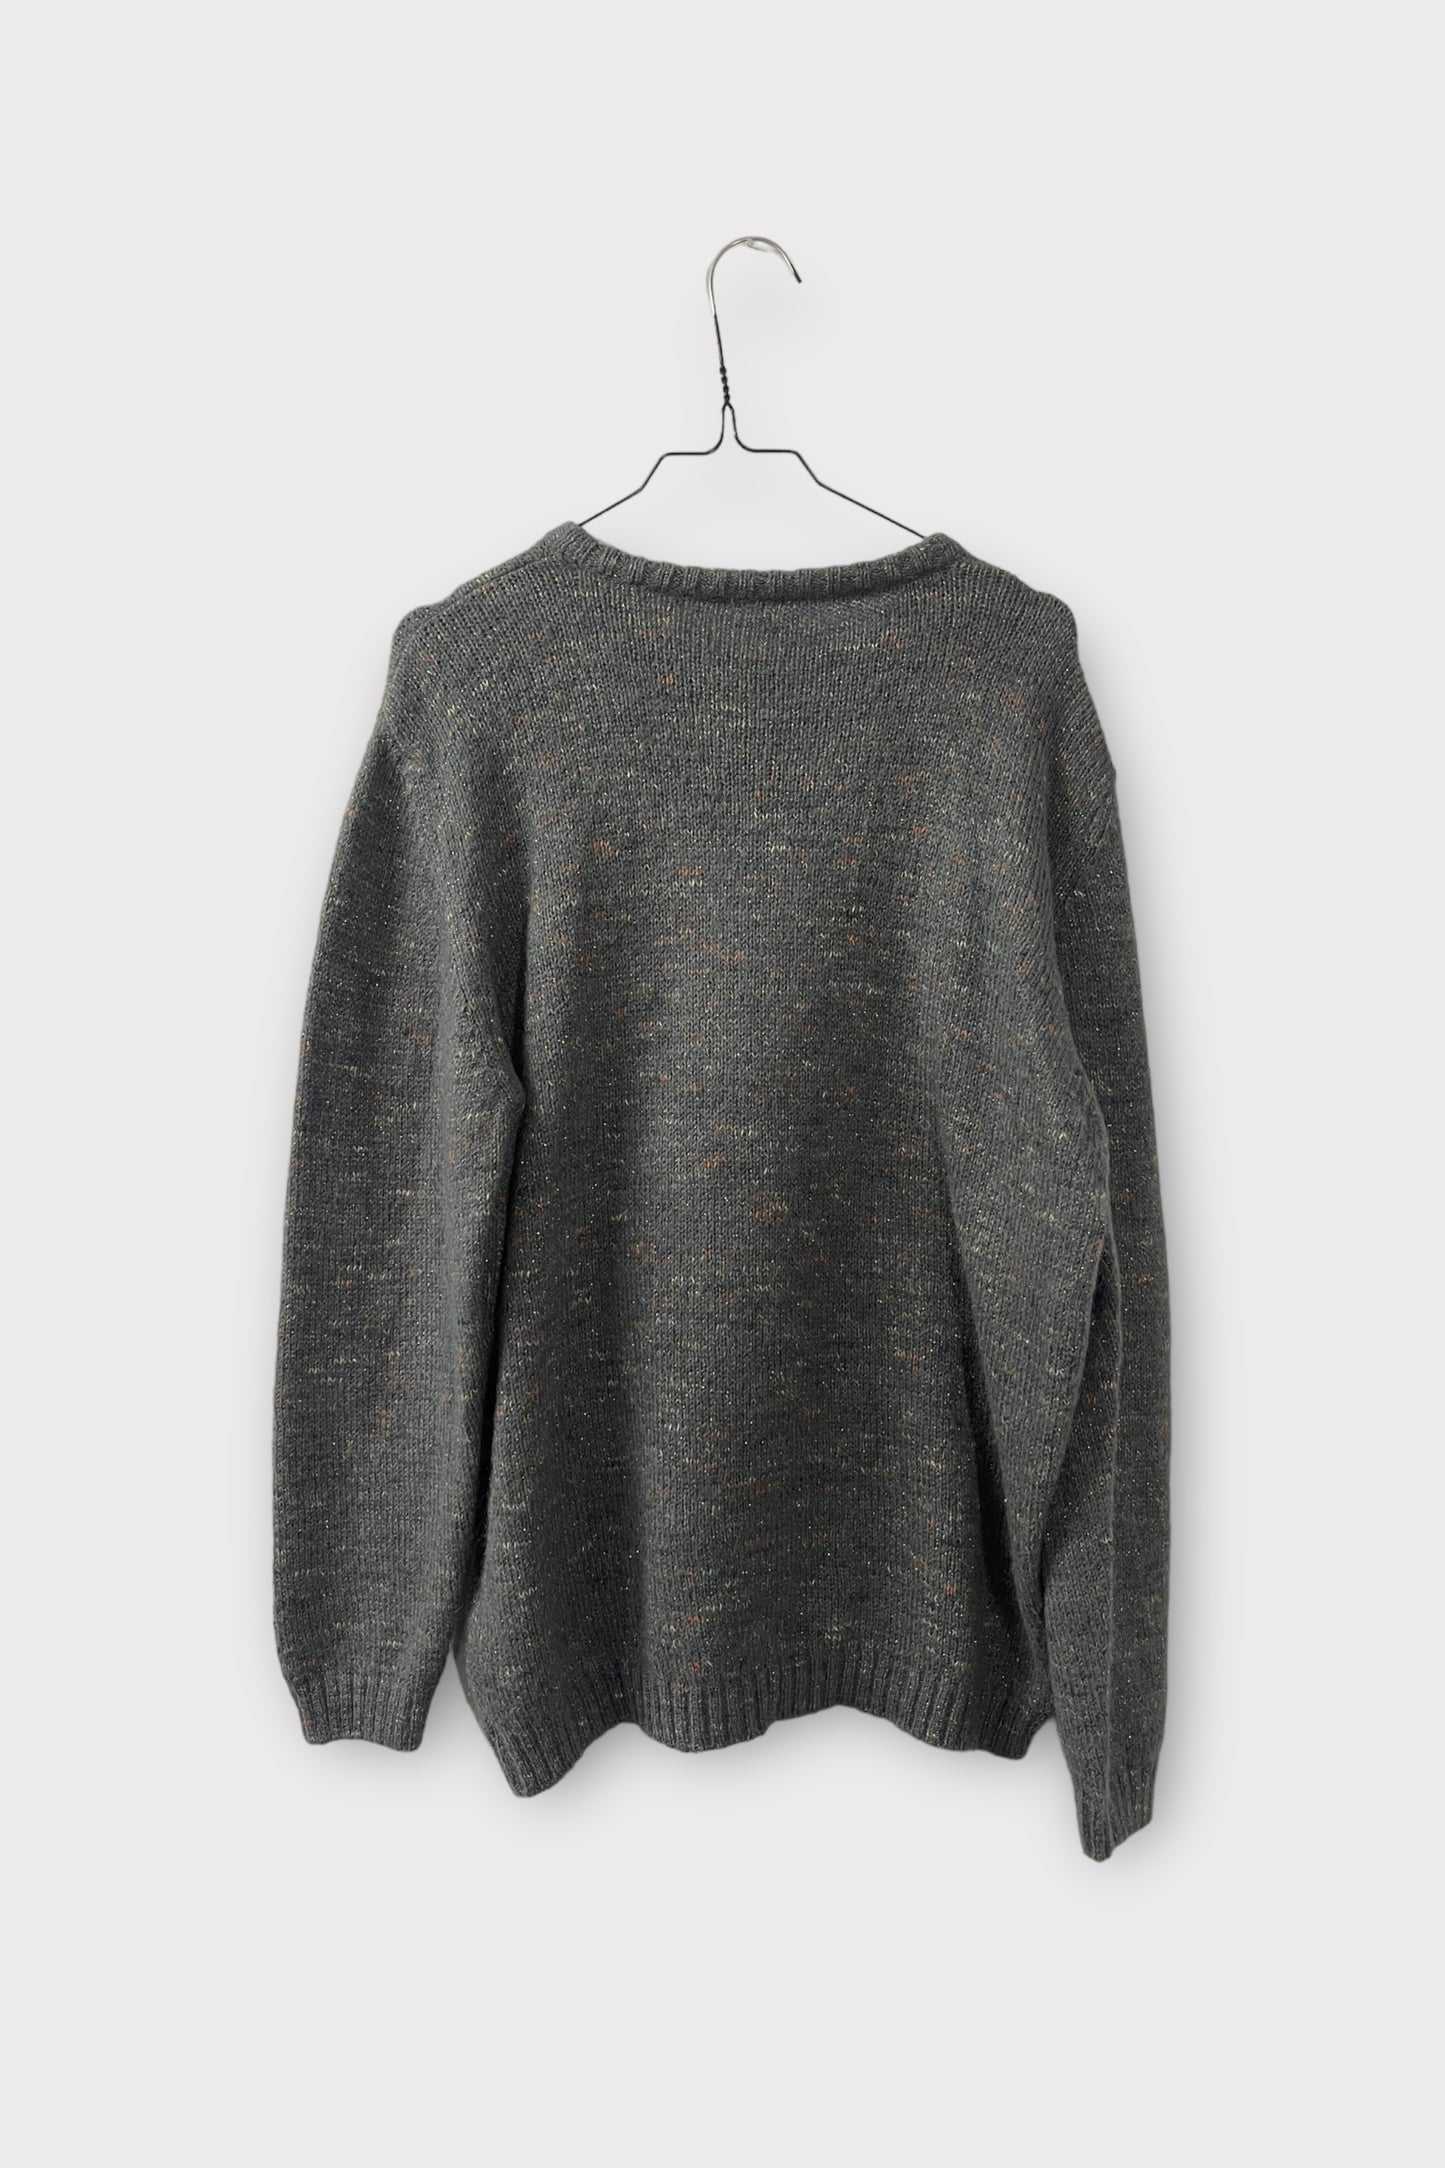 lucinda holiday sweater - M/L